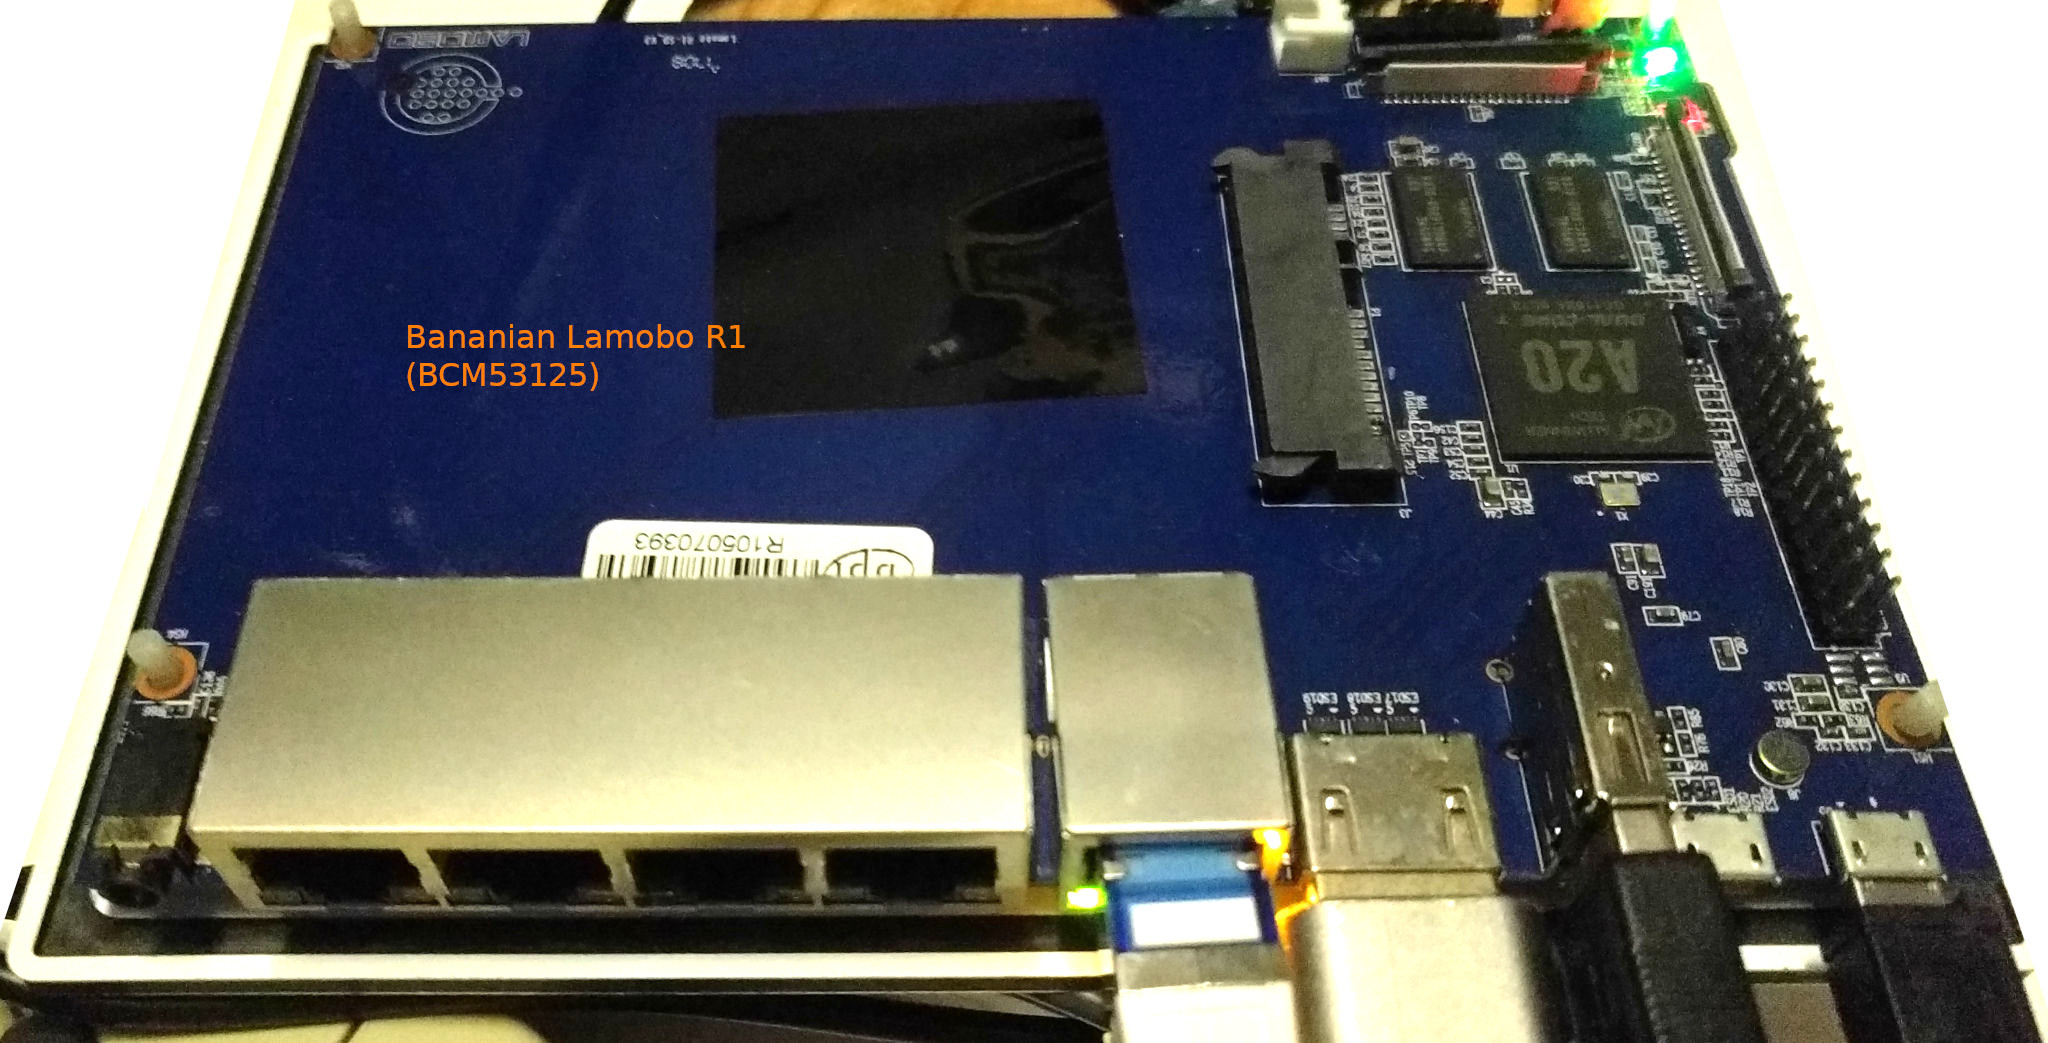 Bananian Bananapi Lamobo R1 (BCM53125) – the ARM router that is not a router (it is a layer 2 switch with only one NIC but it can desktop xfce4) – default root password is pi